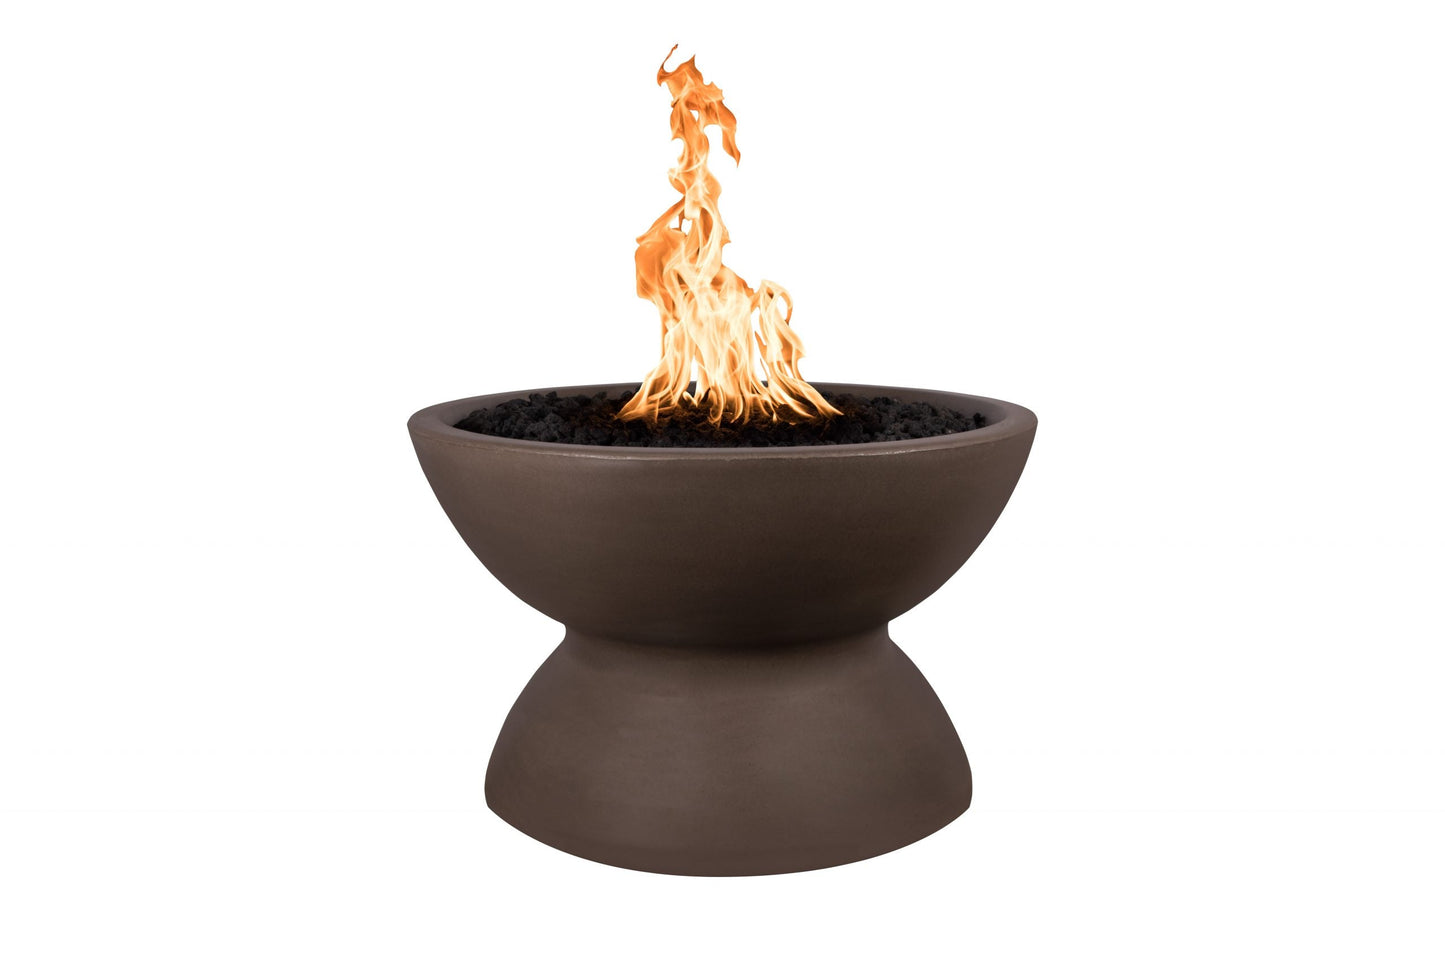 The Outdoor Plus Round Copa 33" White GFRC Concrete Liquid Propane Fire Pit with 110V Electronic Ignition